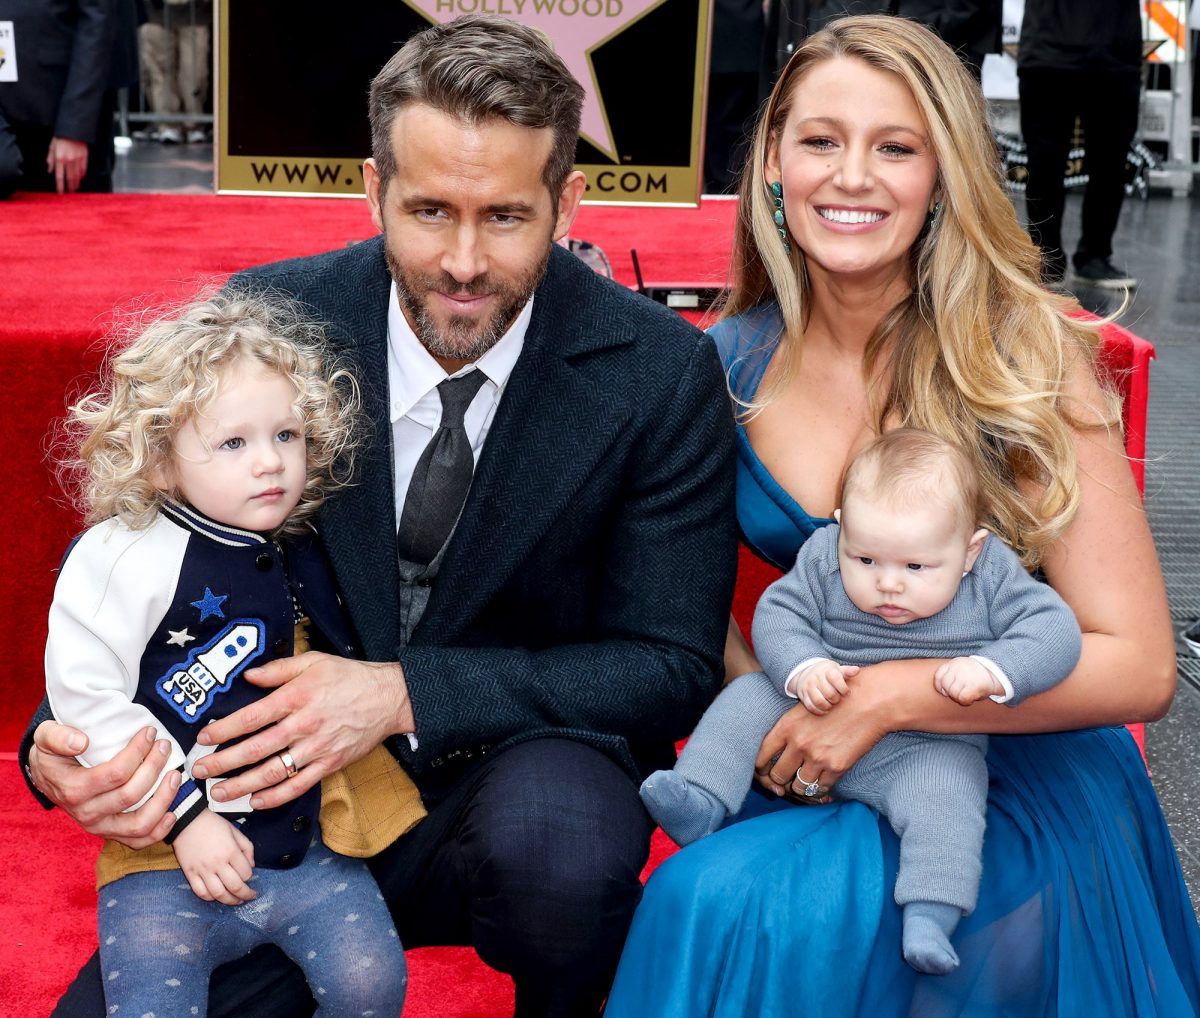 Ryan Reynolds Shares Photo of New Born Daughter Along with Wife, Blake